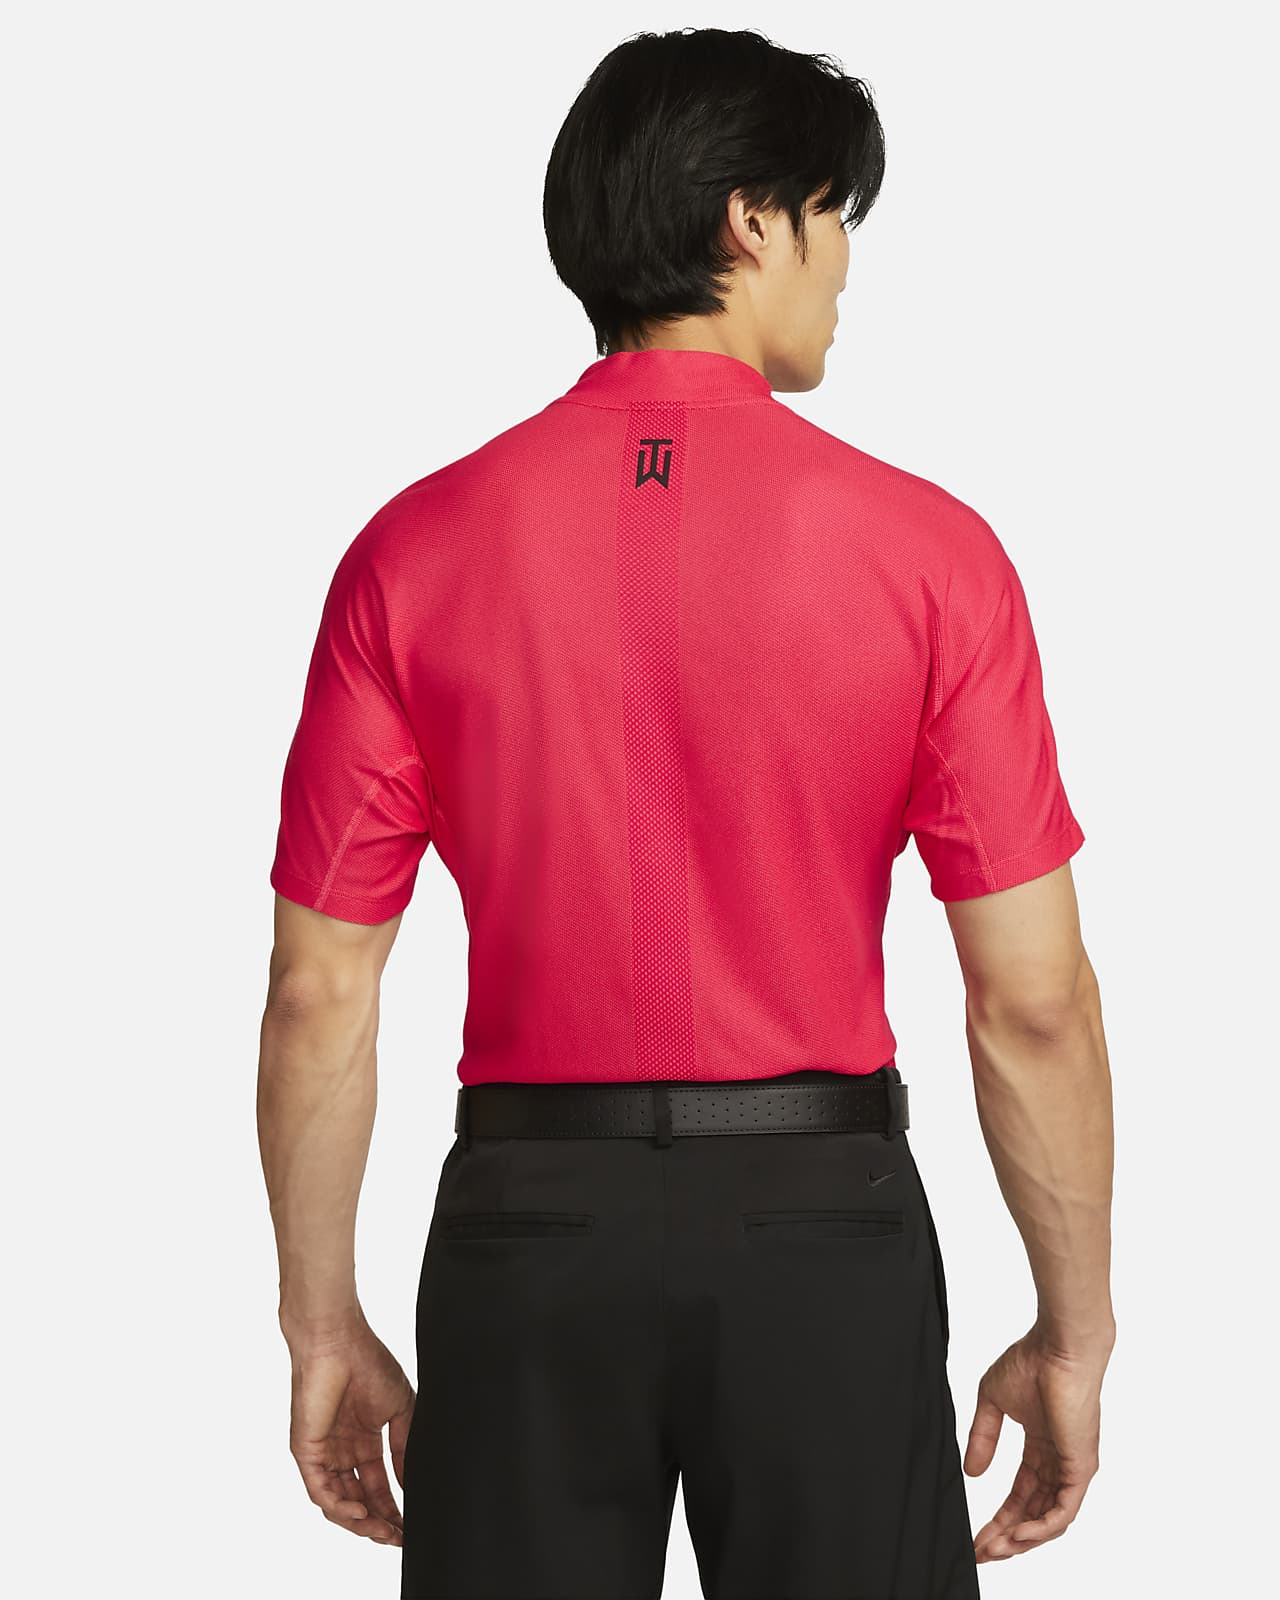 Looking for this shirt anywhere. Nike dri-fit adv mock neck : r/golf